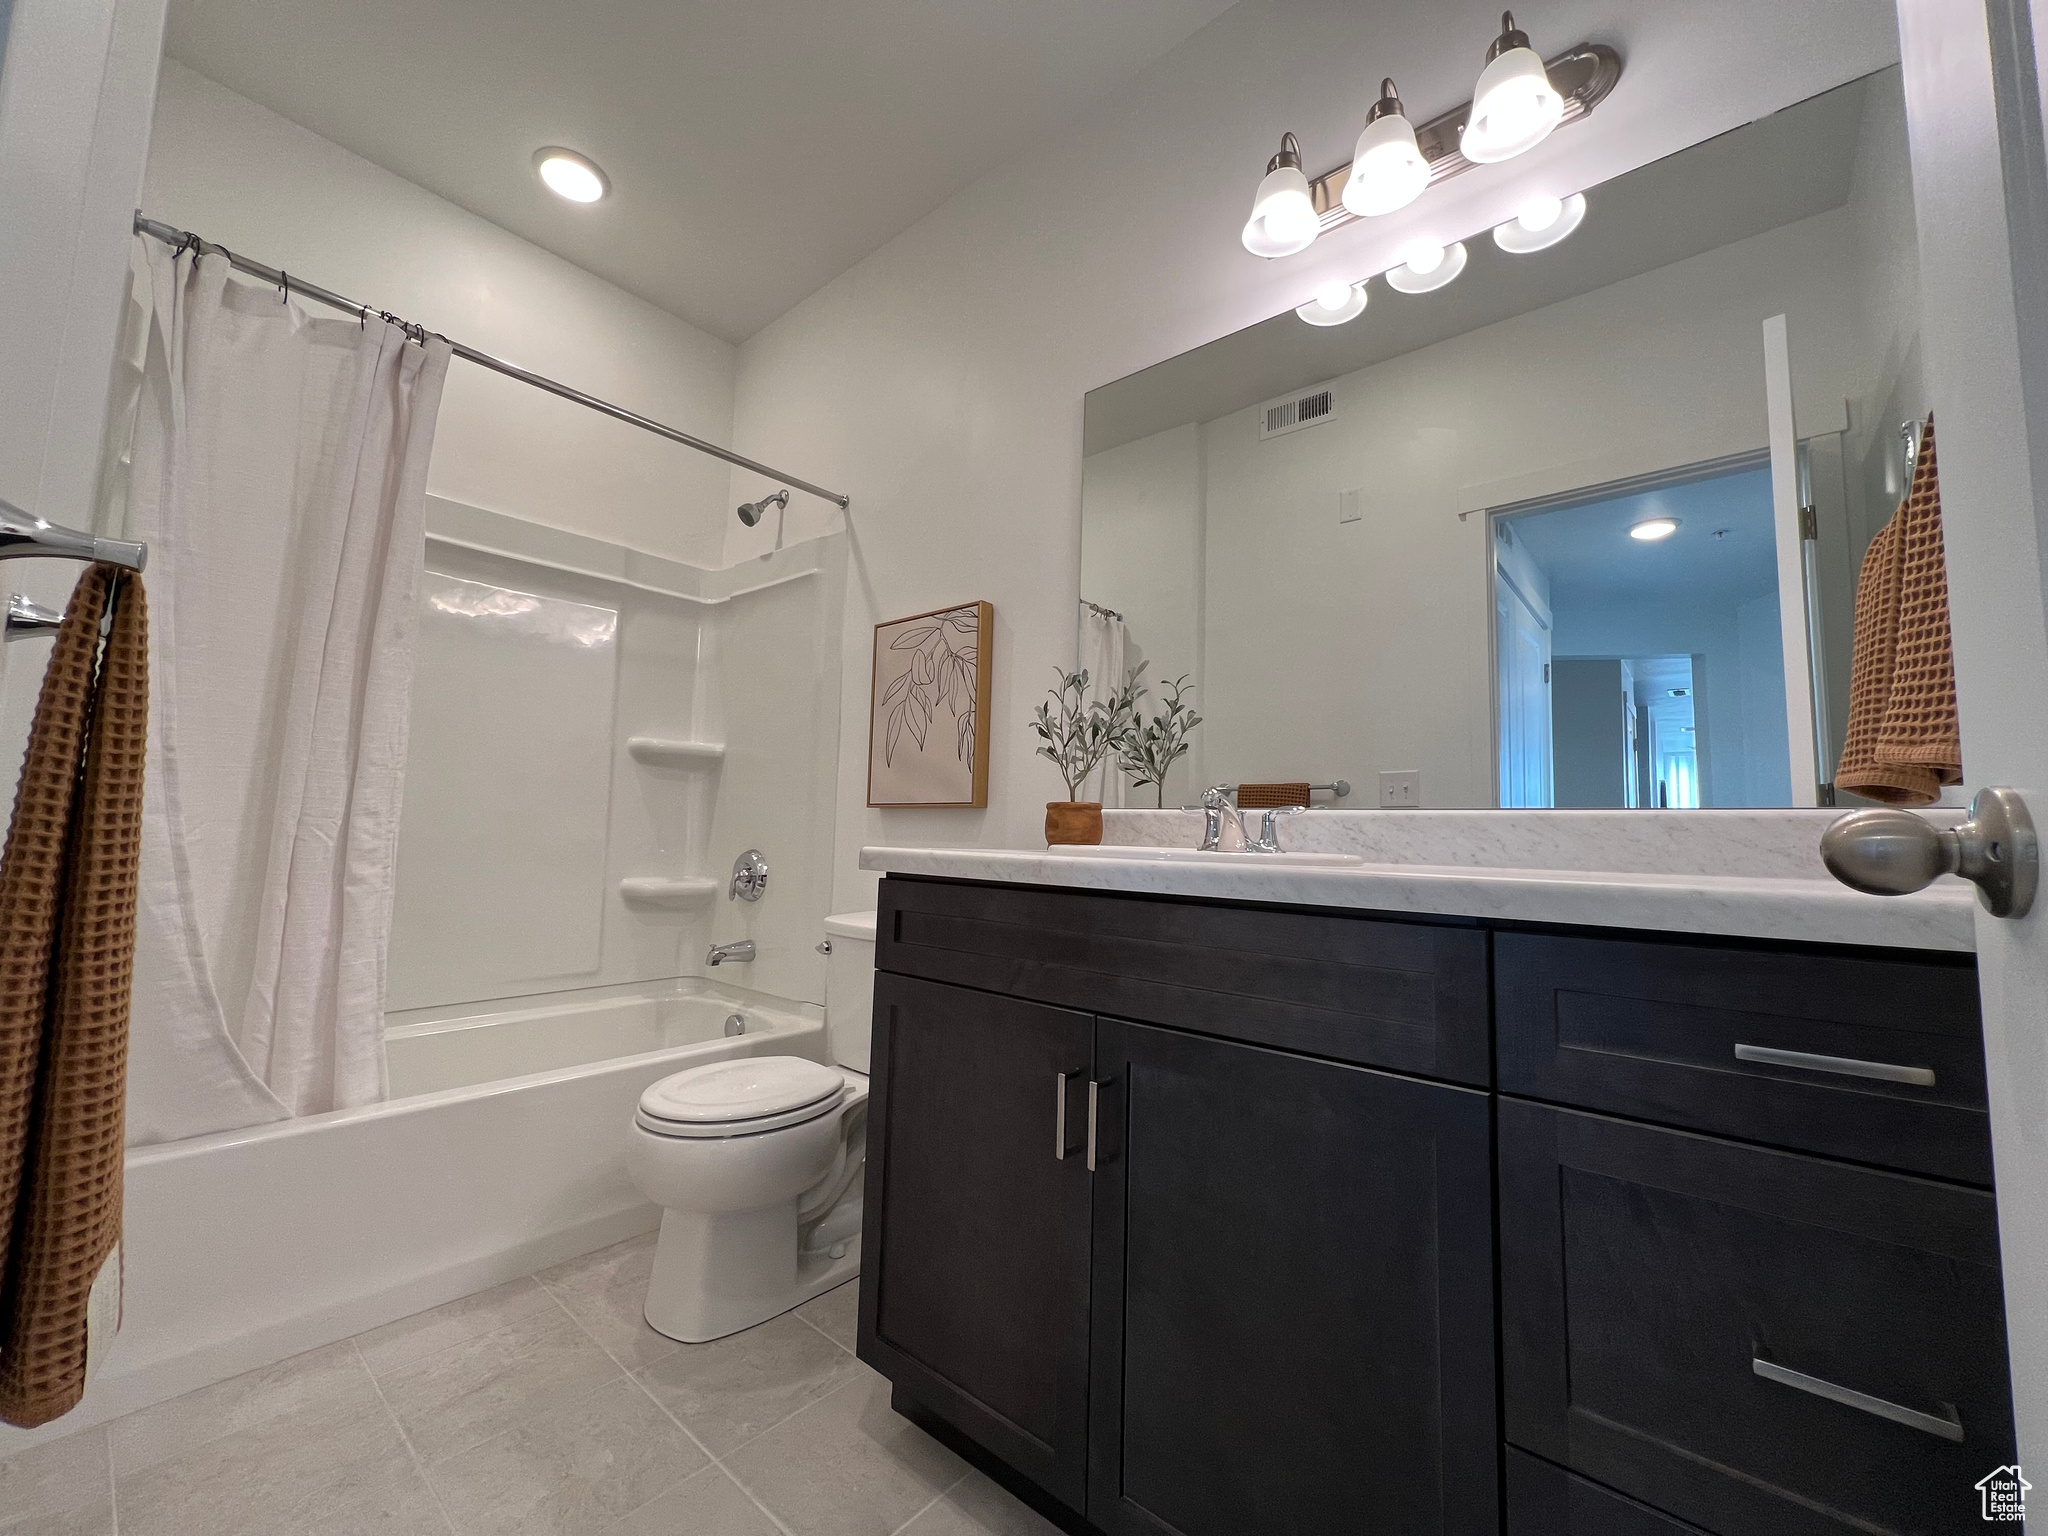 Full bathroom with tile floors, vanity, toilet, and shower / bath combo with shower curtain